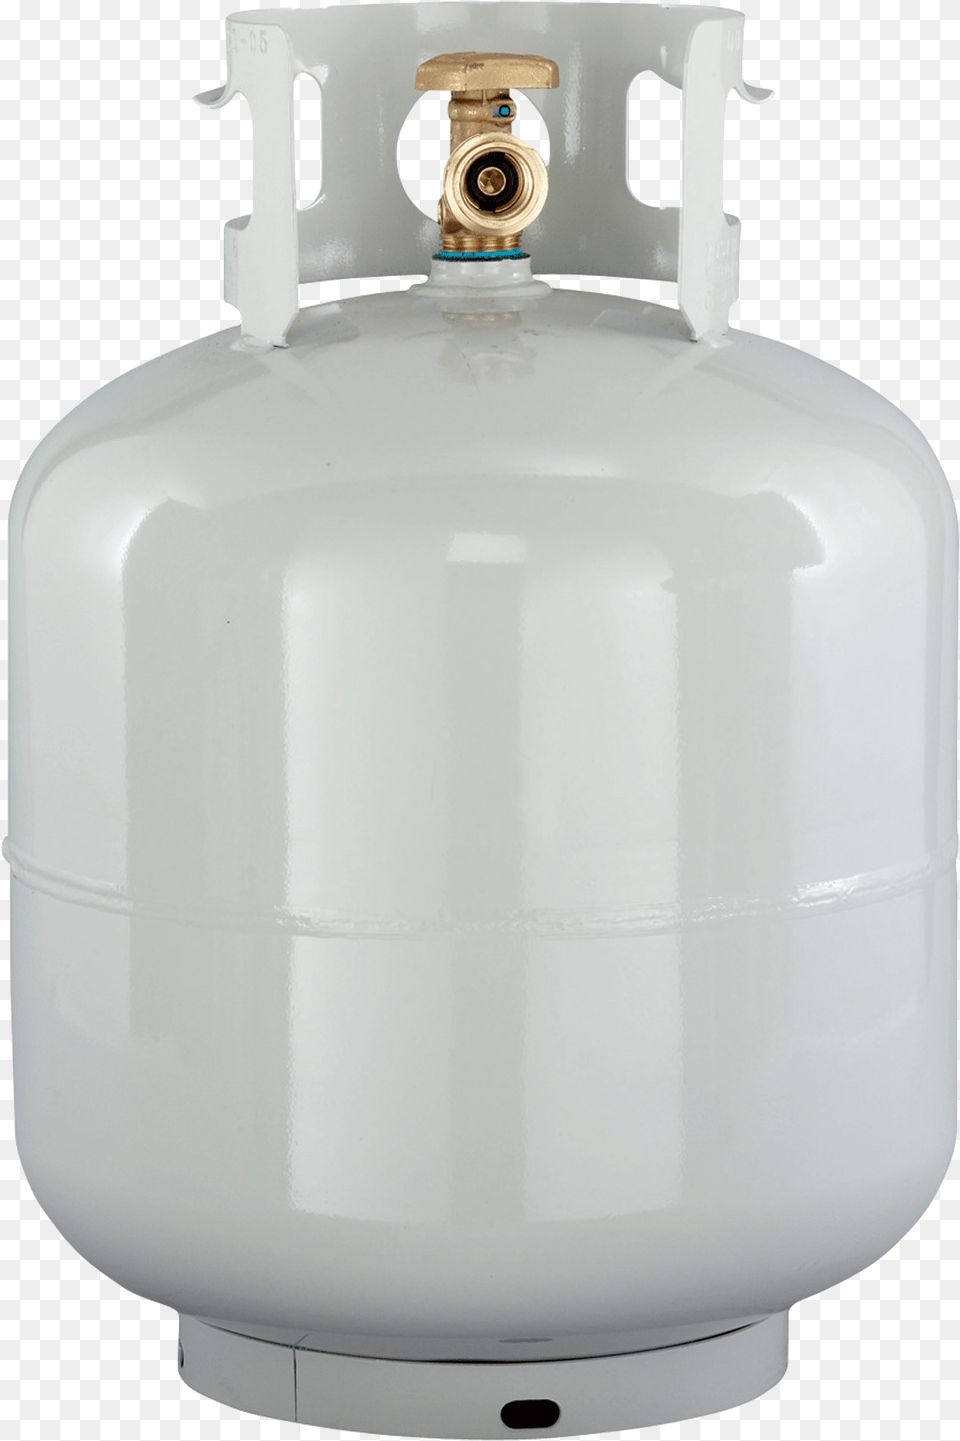 Water Tank Propane Tank King Of The Hill, Cylinder Free Transparent Png